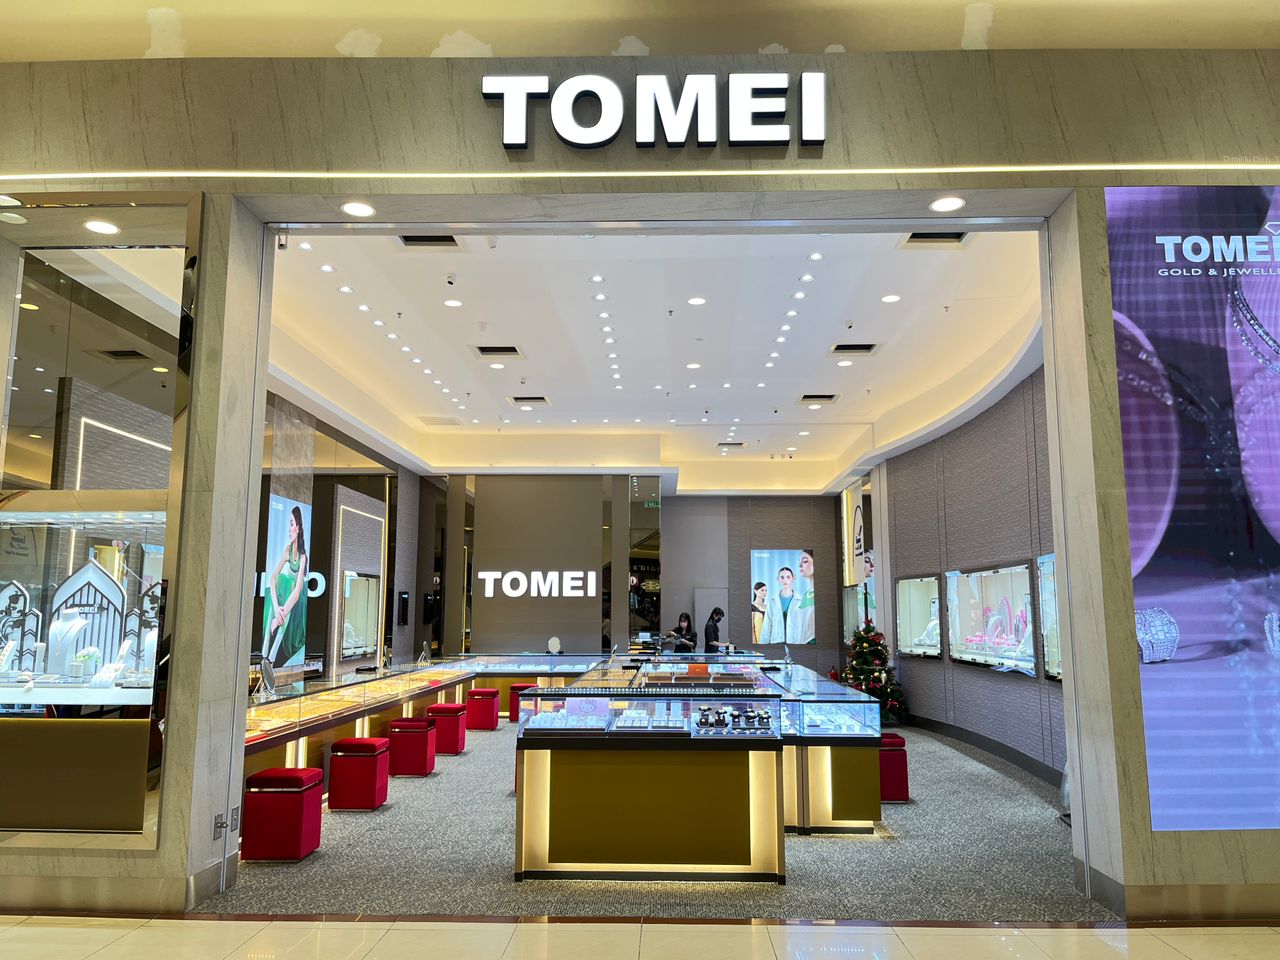 Tomei